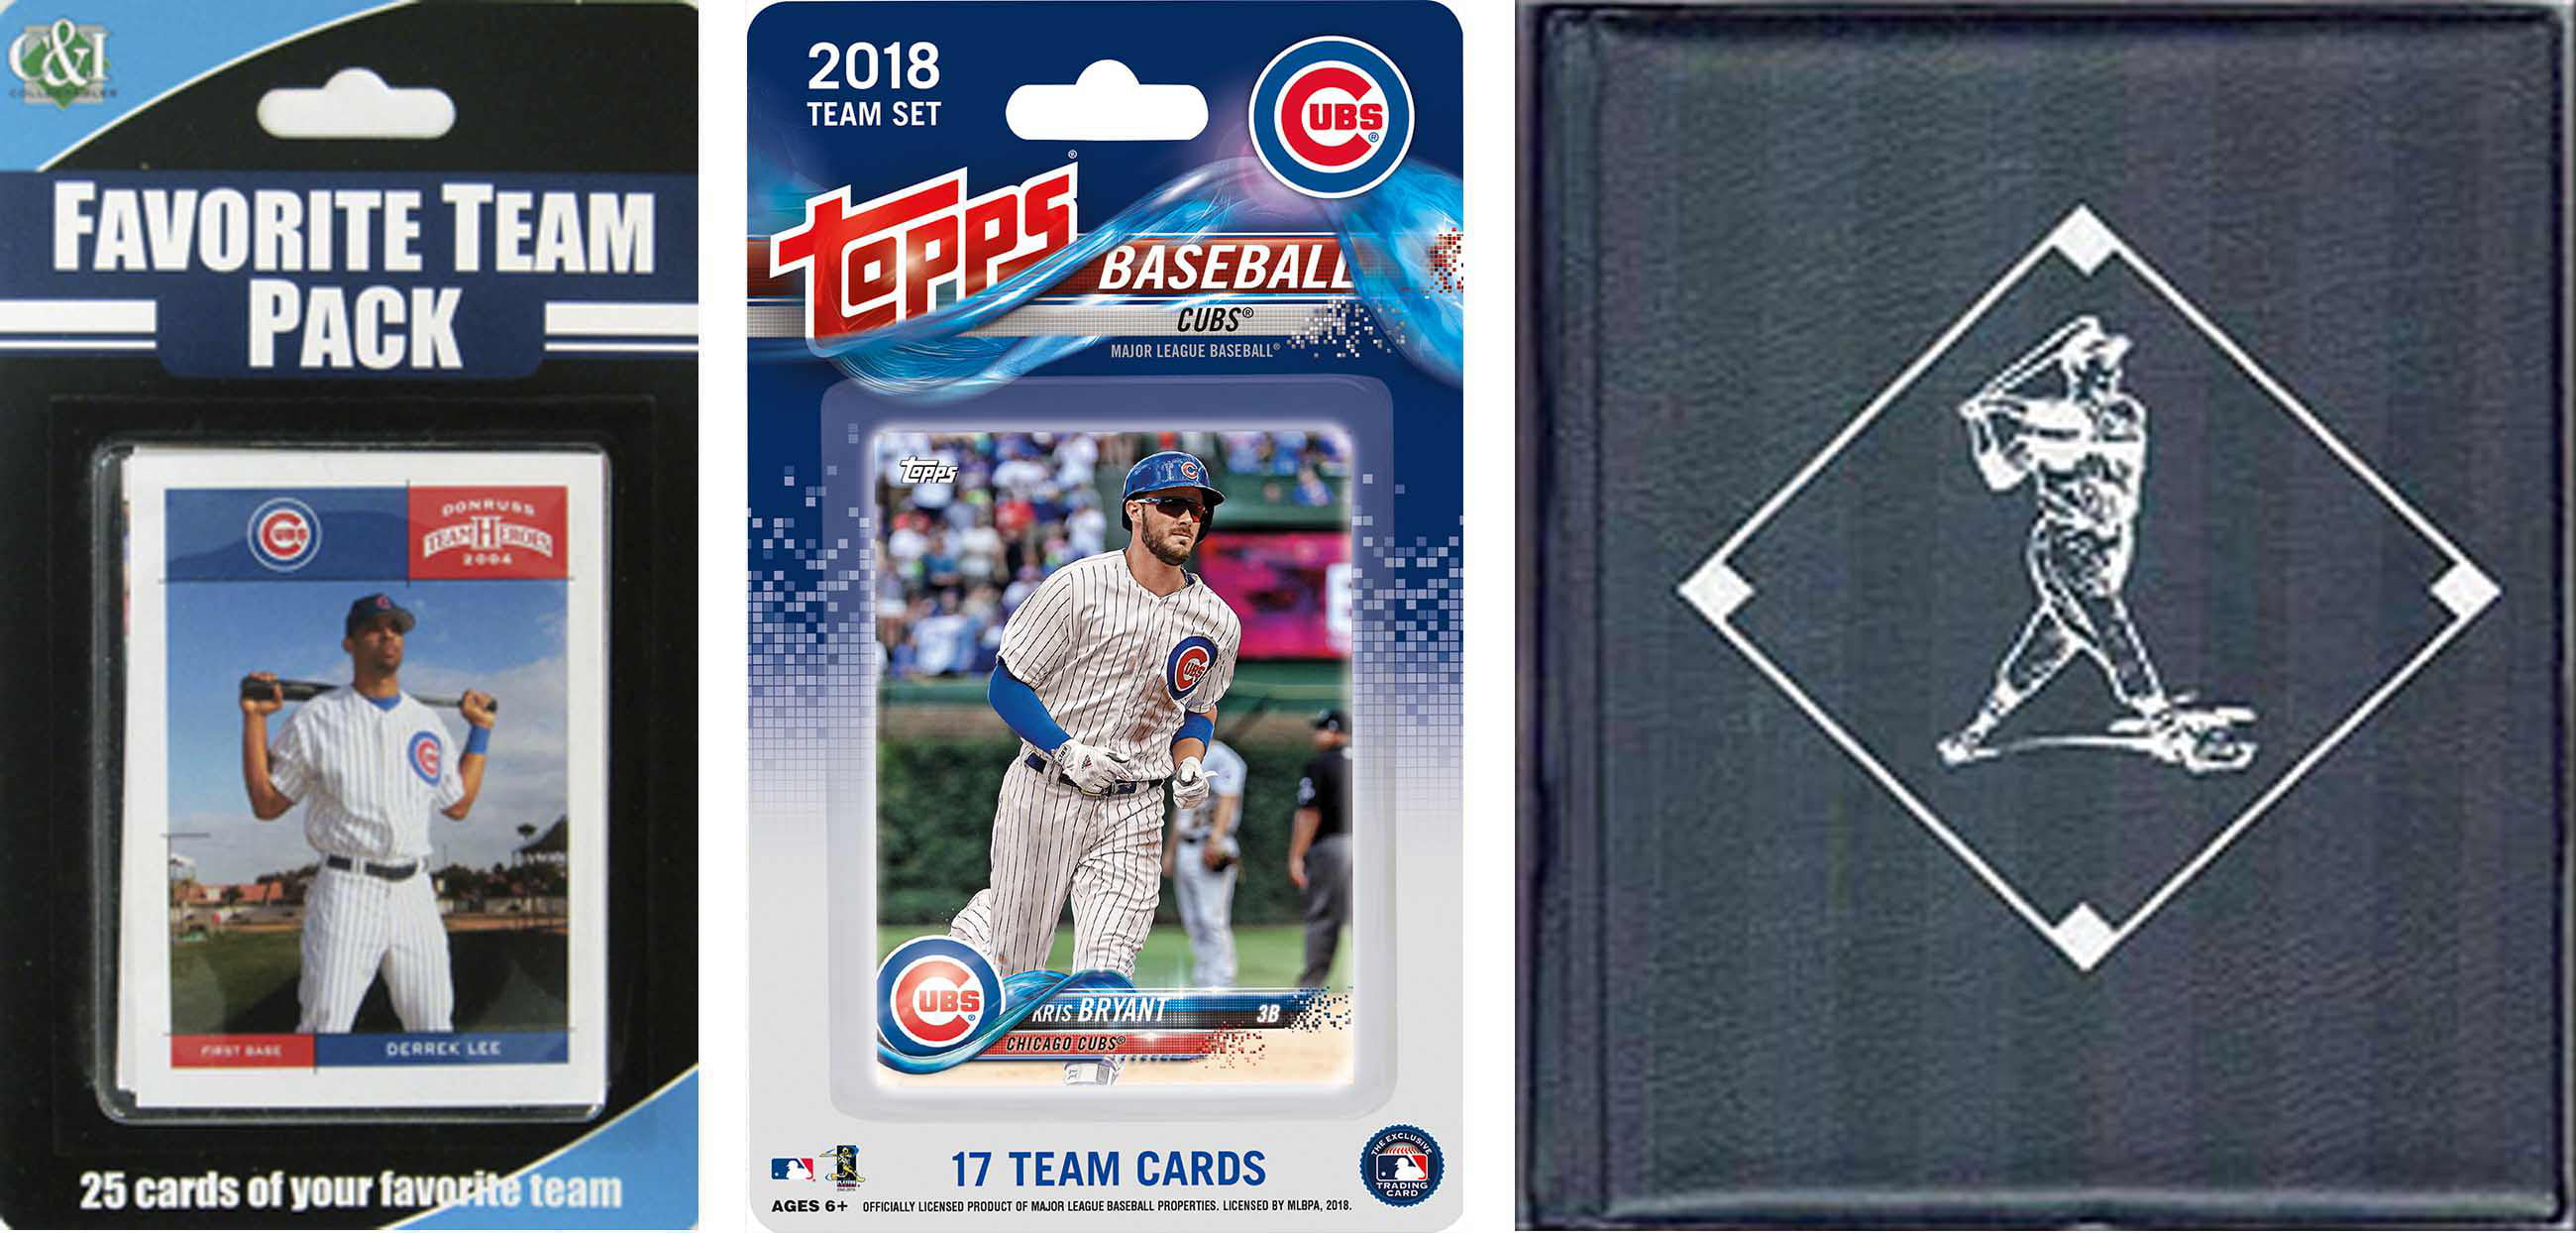 C & I Collectables CUBSTSC18 MLB Chicago Cubs Licensed 2018 Topps Team Set & Favorite Player Trading Cards Plus Storage Album -  C & I Collectables Inc